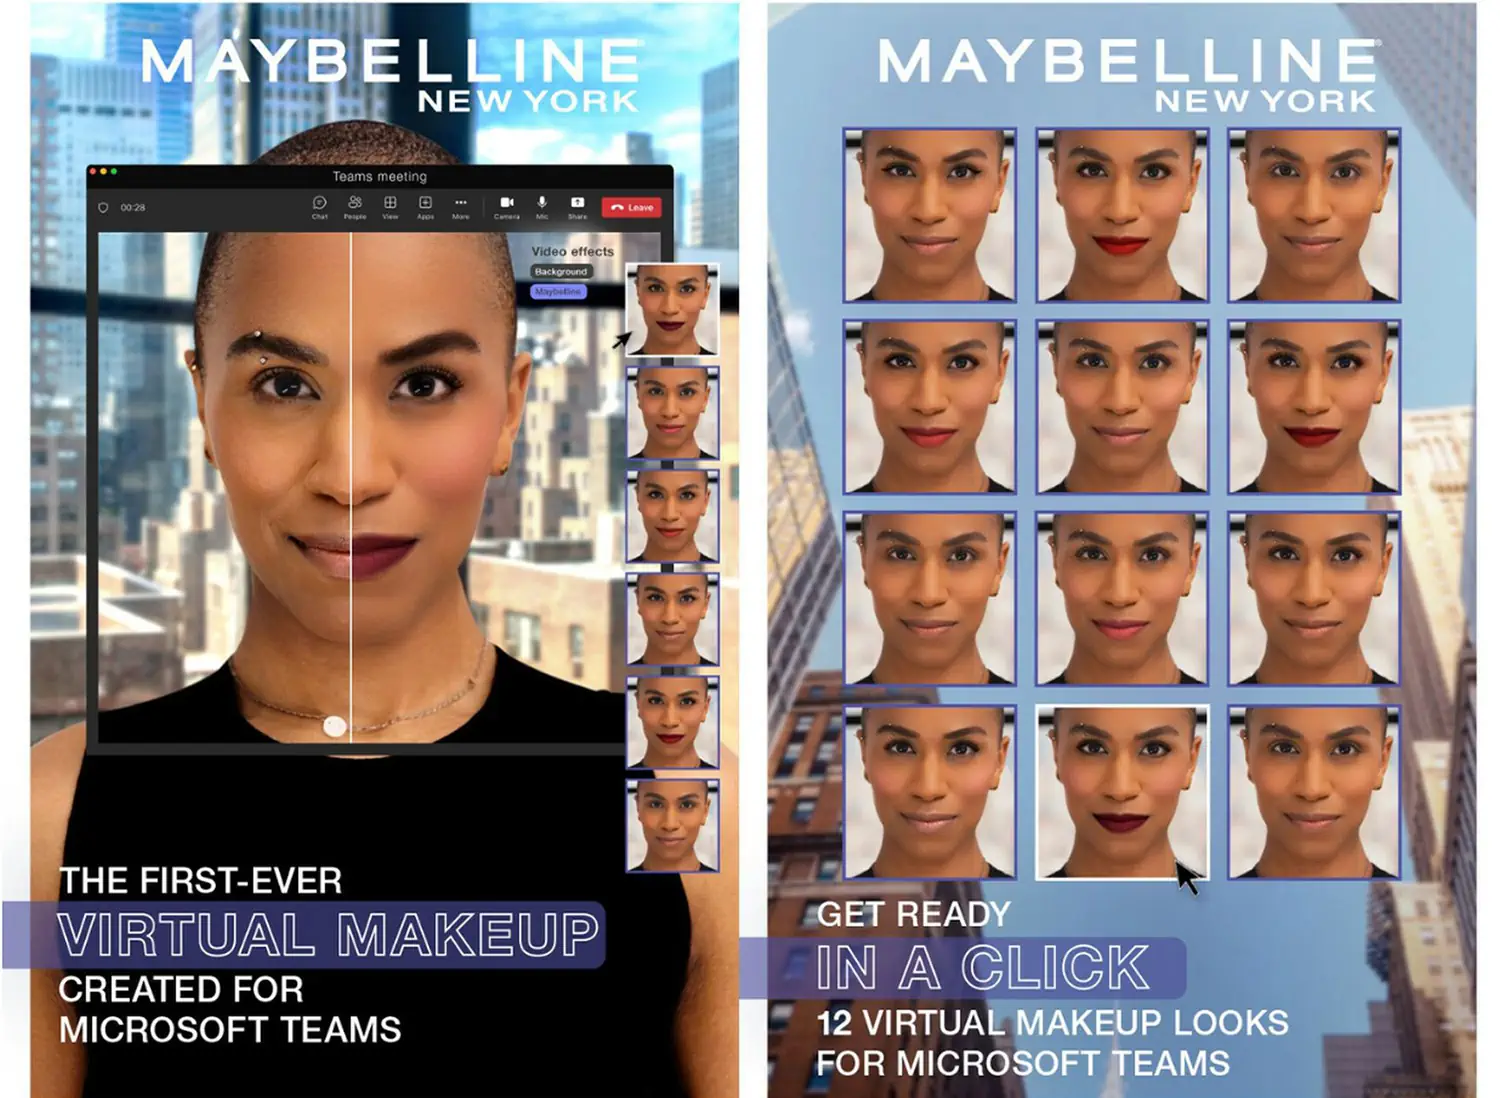 Maybelline New York and Microsoft Teams fuse the future of virtual beauty